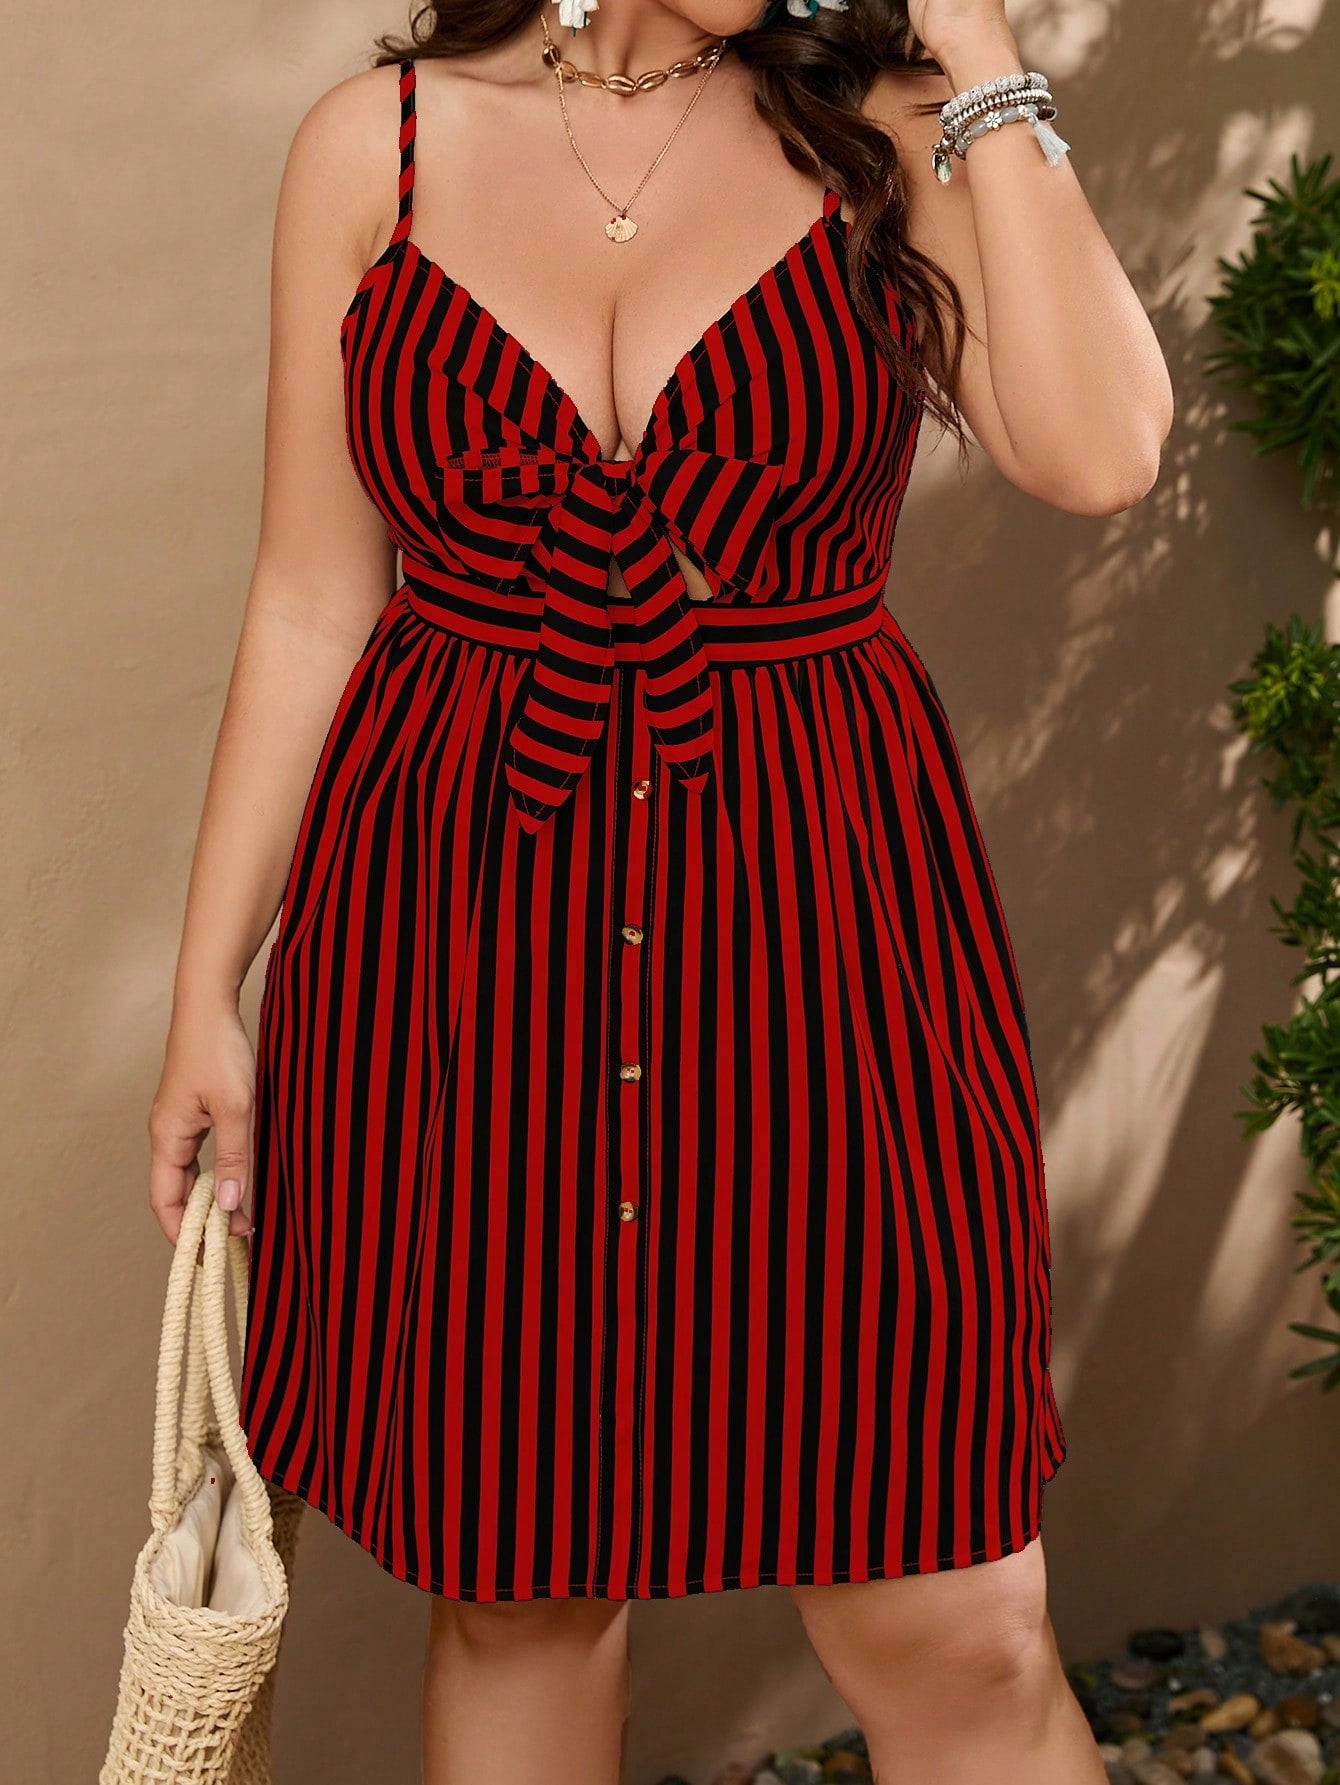 WYWH Women Plus Size Striped Casual Spaghetti Strap Dress With Front Knot Detail For Summer